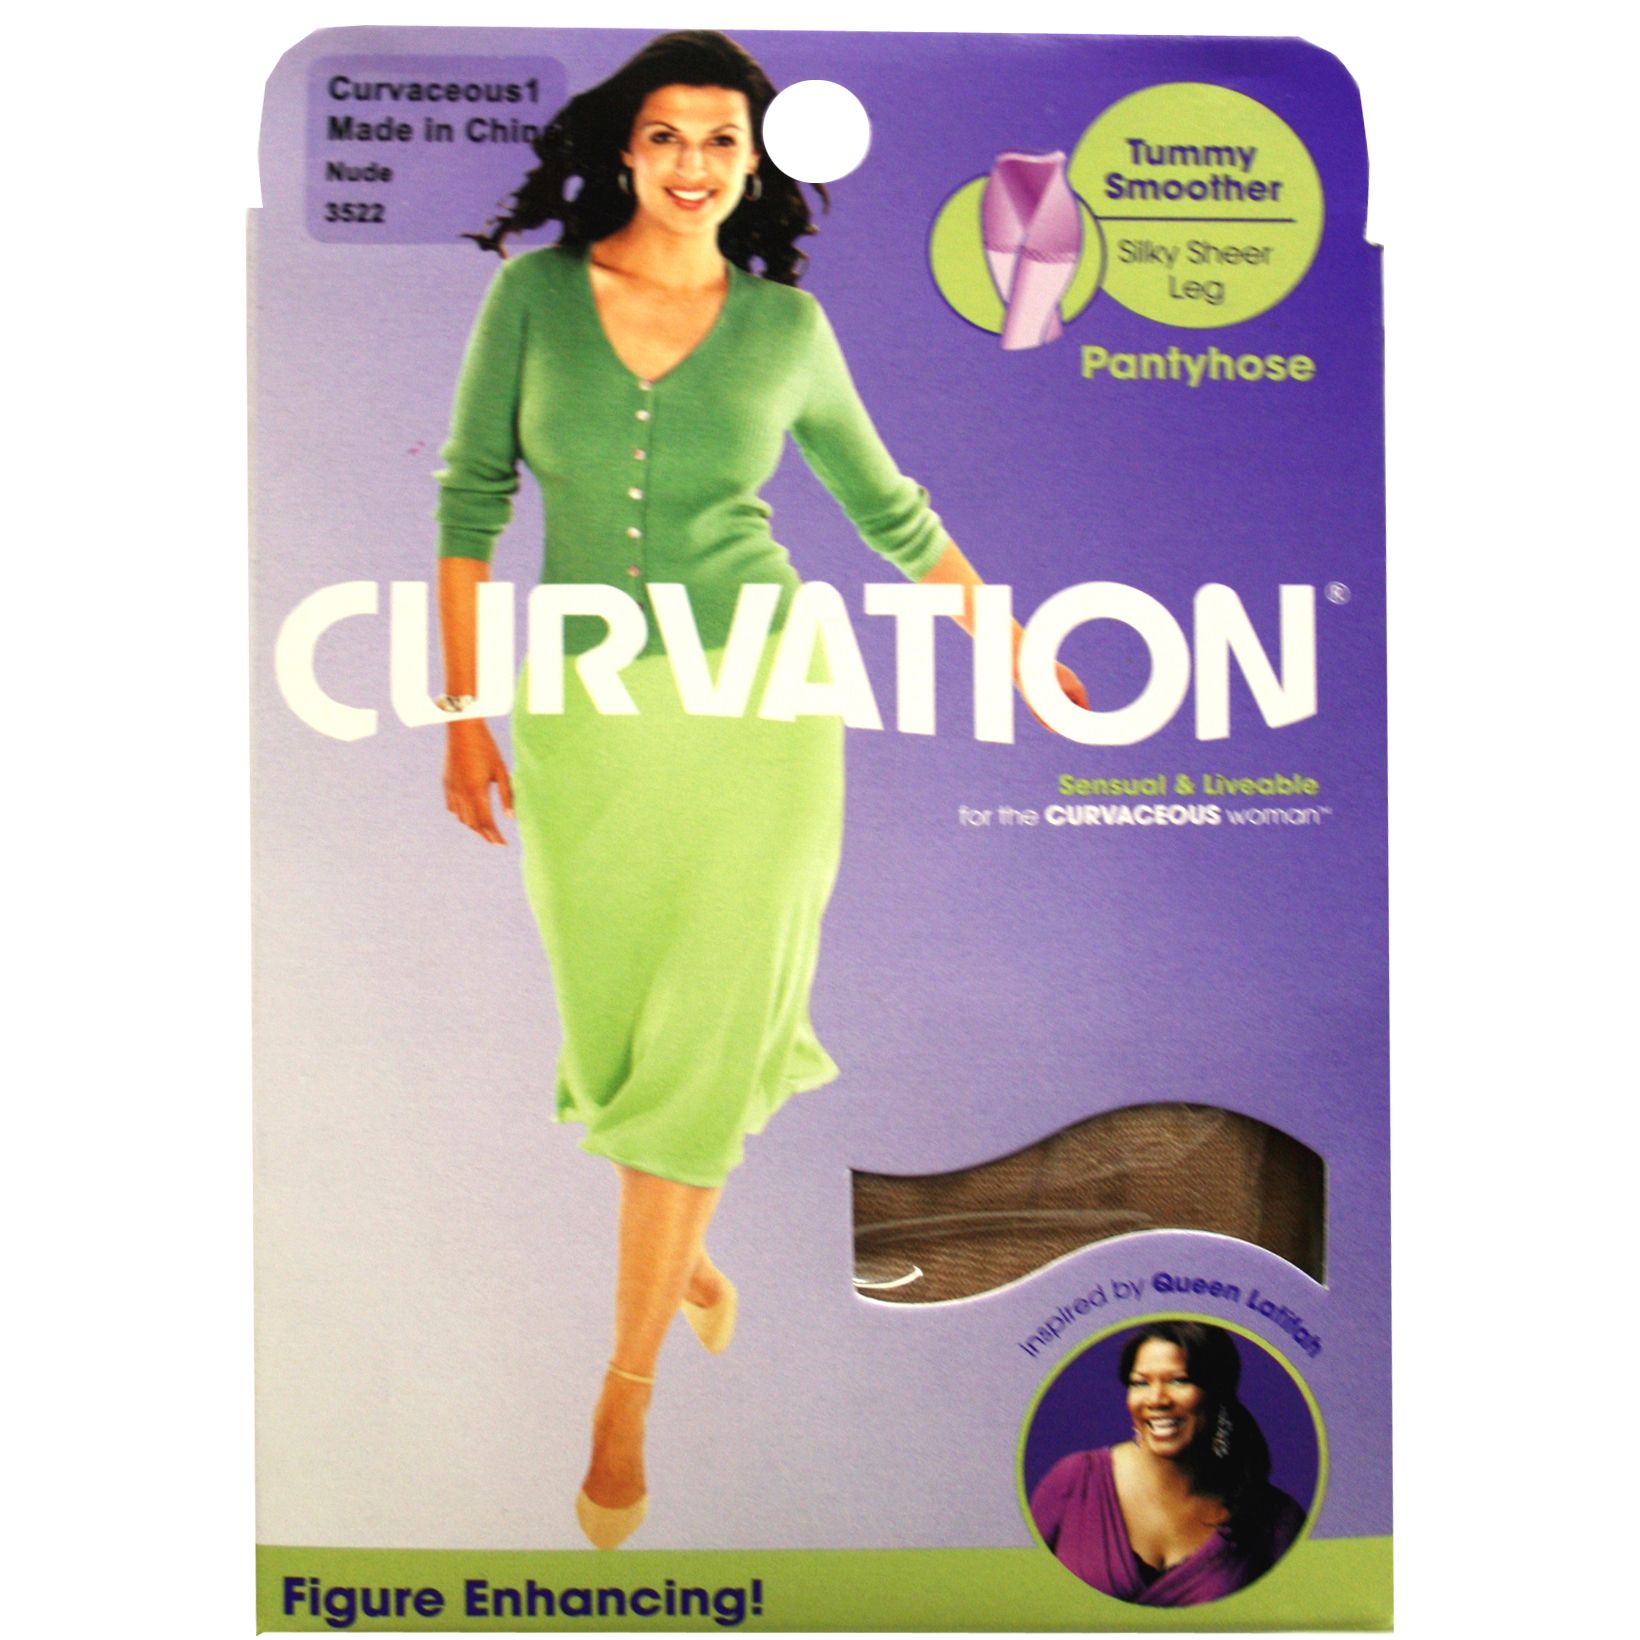 Curvation Women's Tummy Smoother Pantyhose